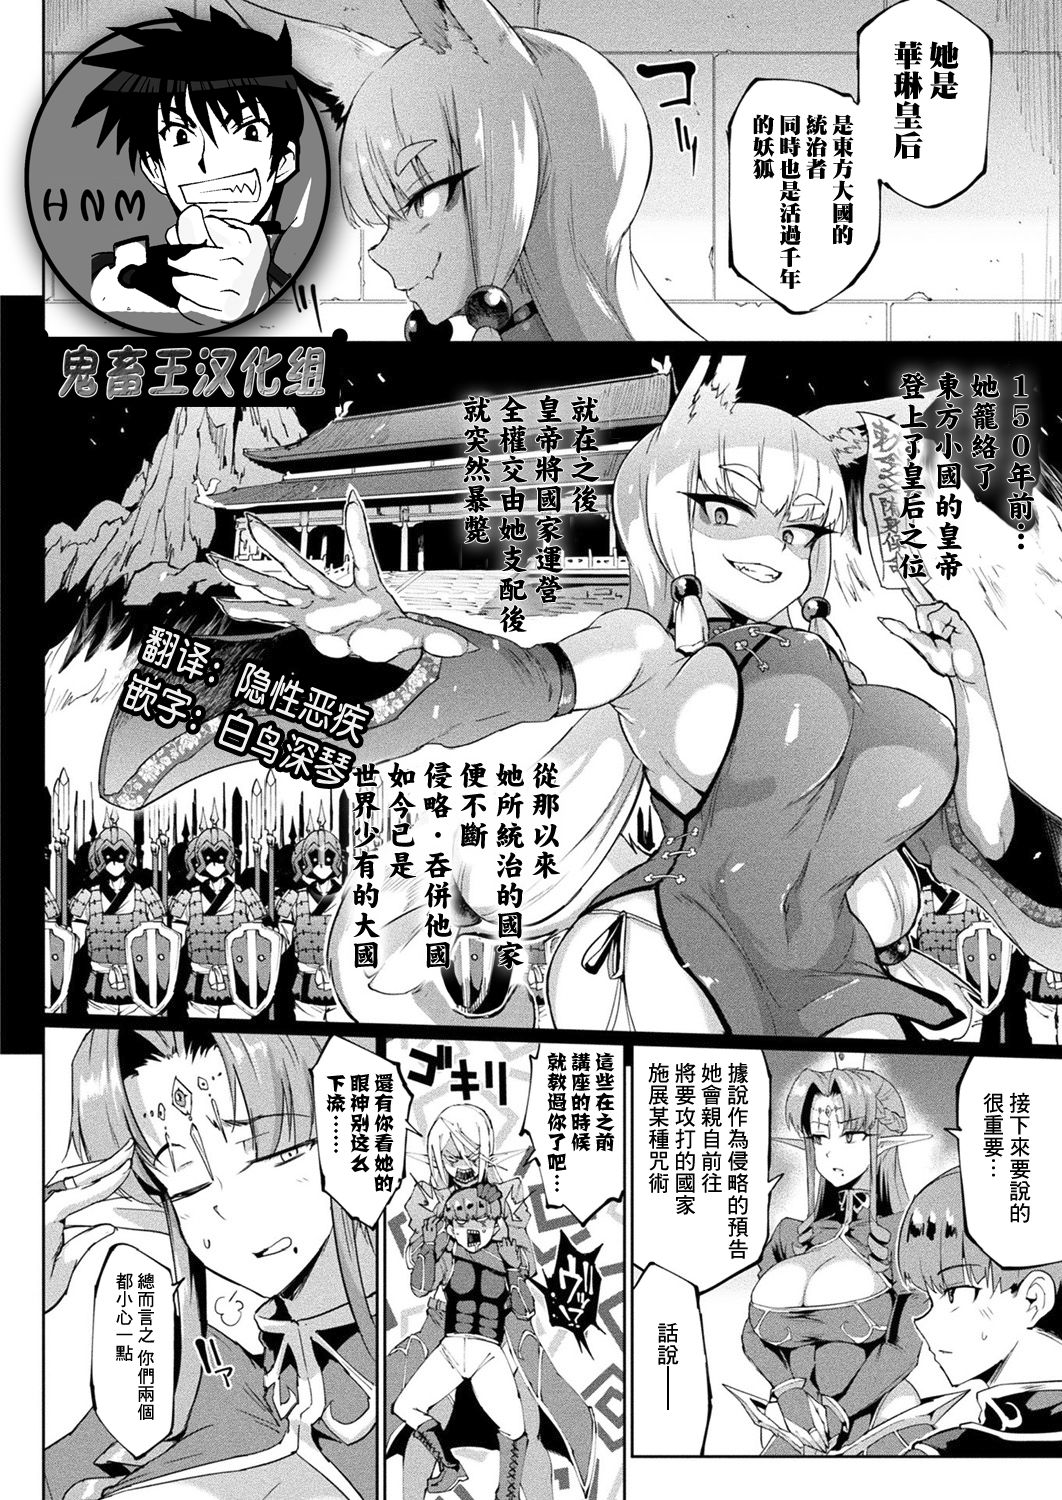 [Fan no hitori] YOUR GRACE, MY MASTER (COMIC Unreal 2019-10 Vol. 81) [Chinese] [鬼畜王汉化组] [Digital] page 1 full